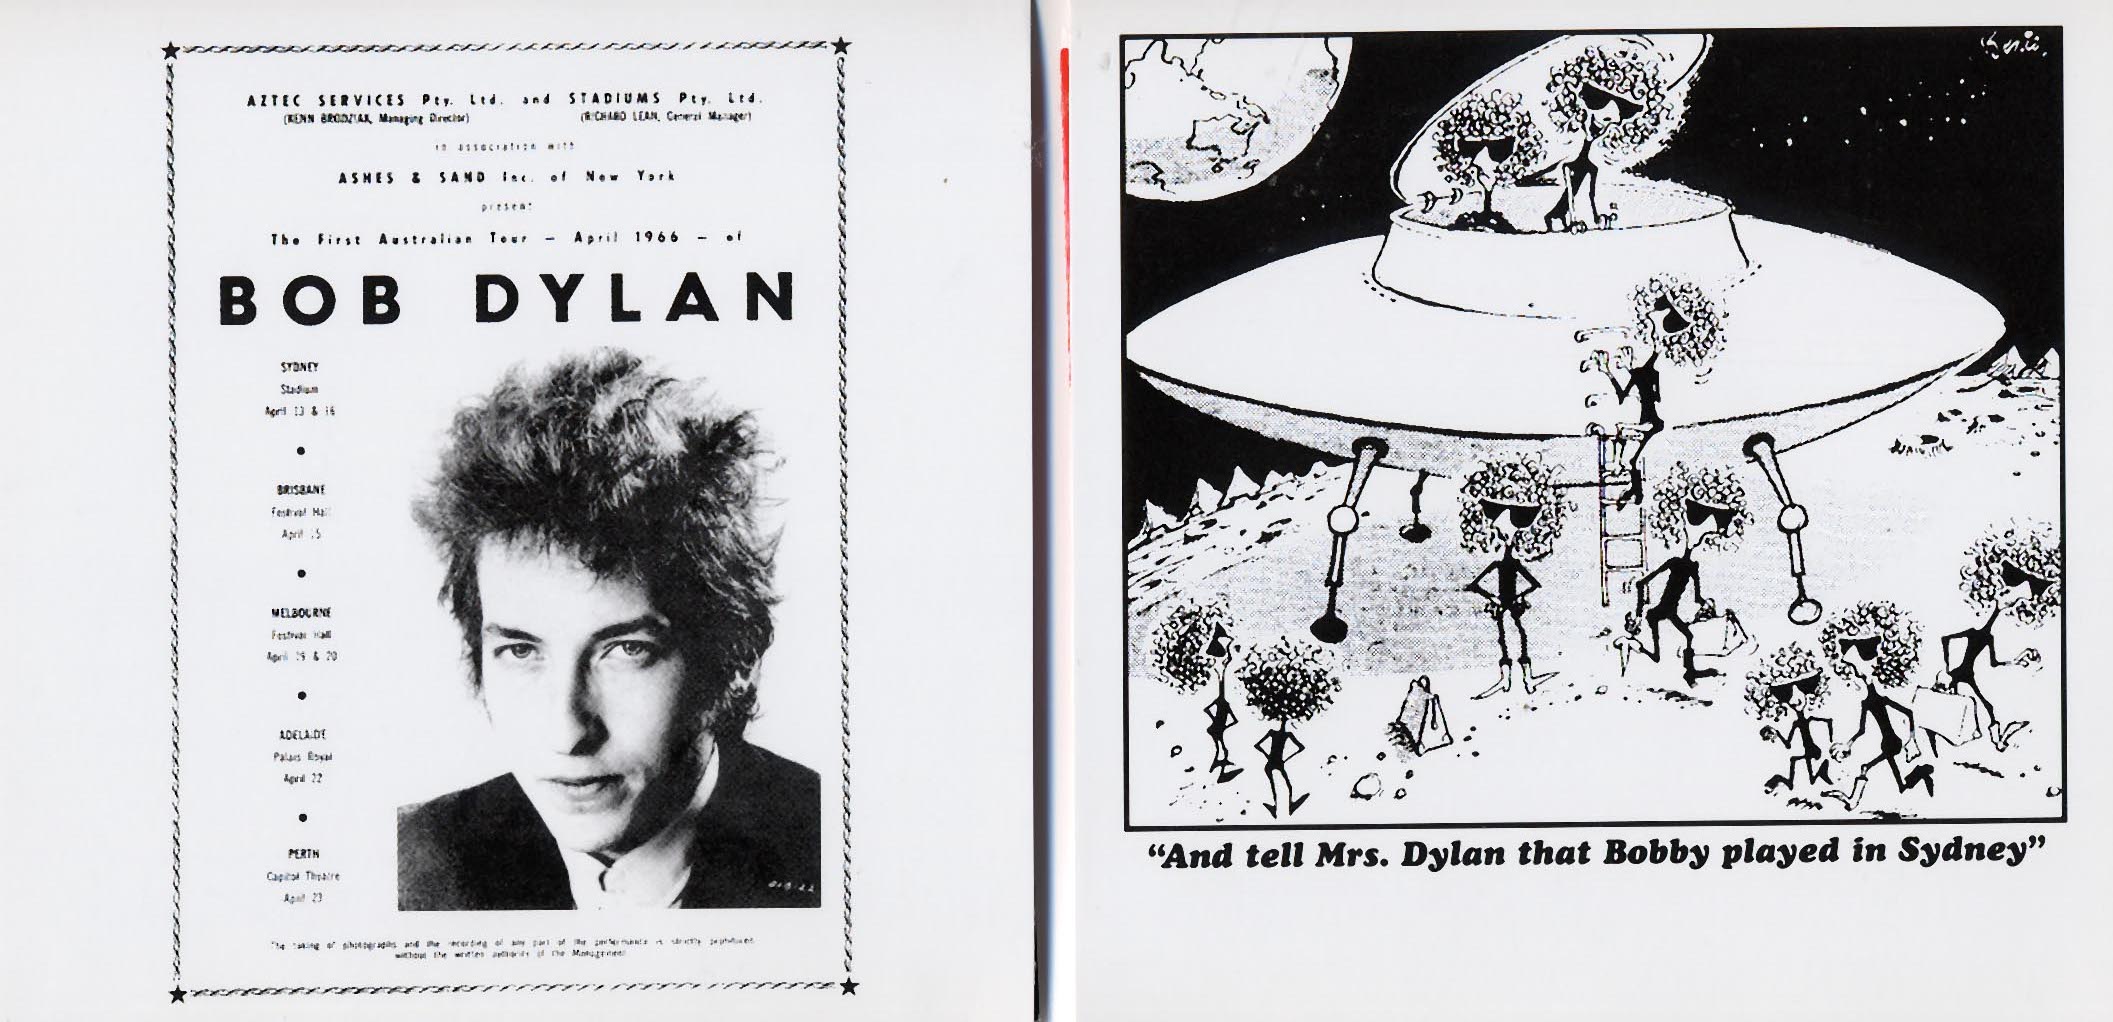 BobDylan1966GenuineLiveCD1and2APheonixInApril (15).JPG